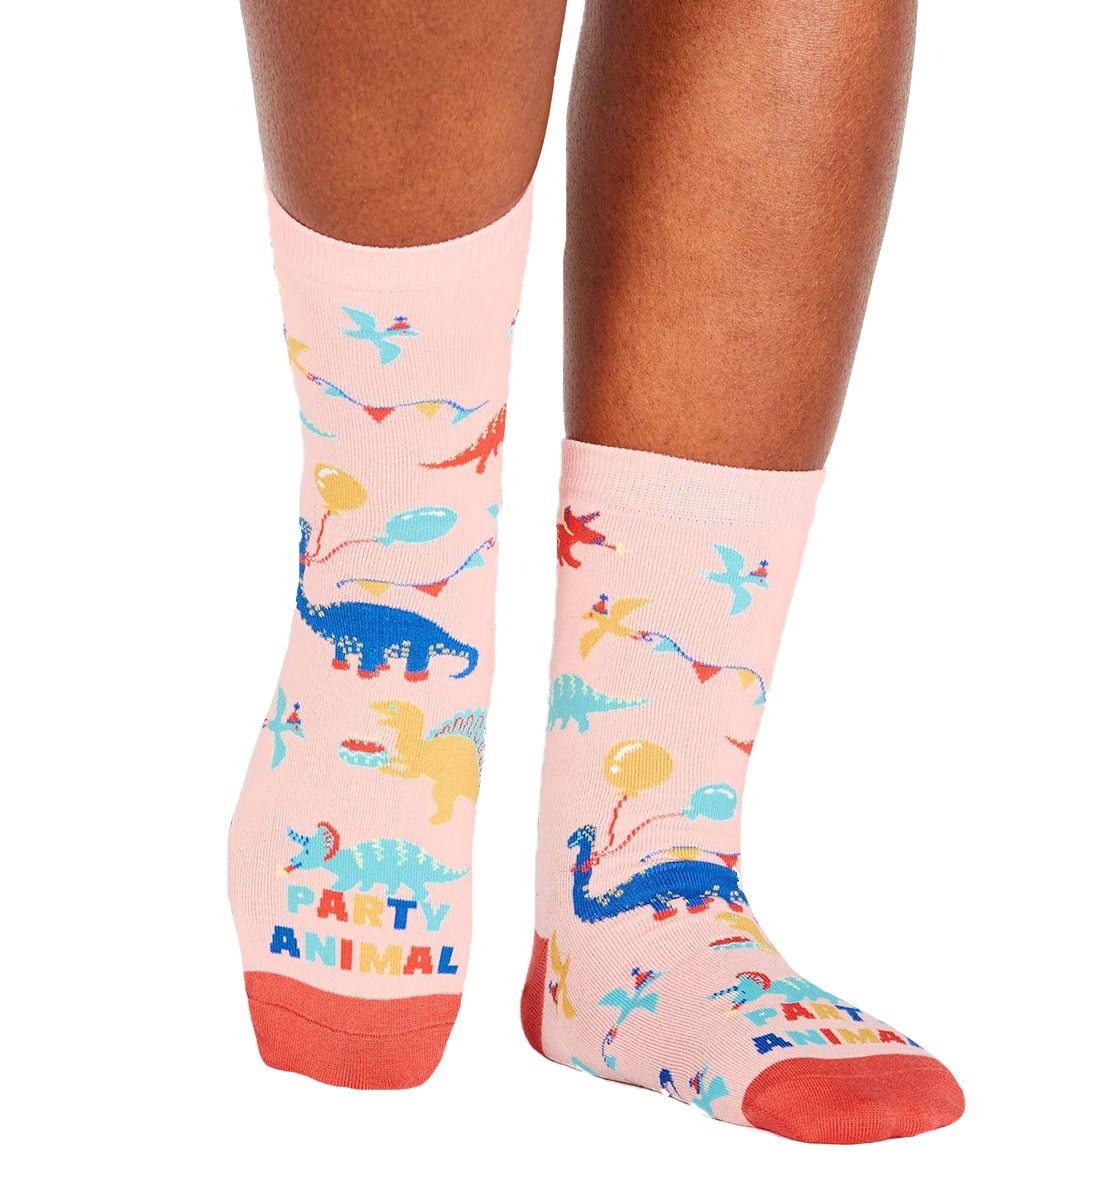 SOCK it to me Women&#39;s Crew Socks (w0142)- Party Animal - Party Animal,One Size